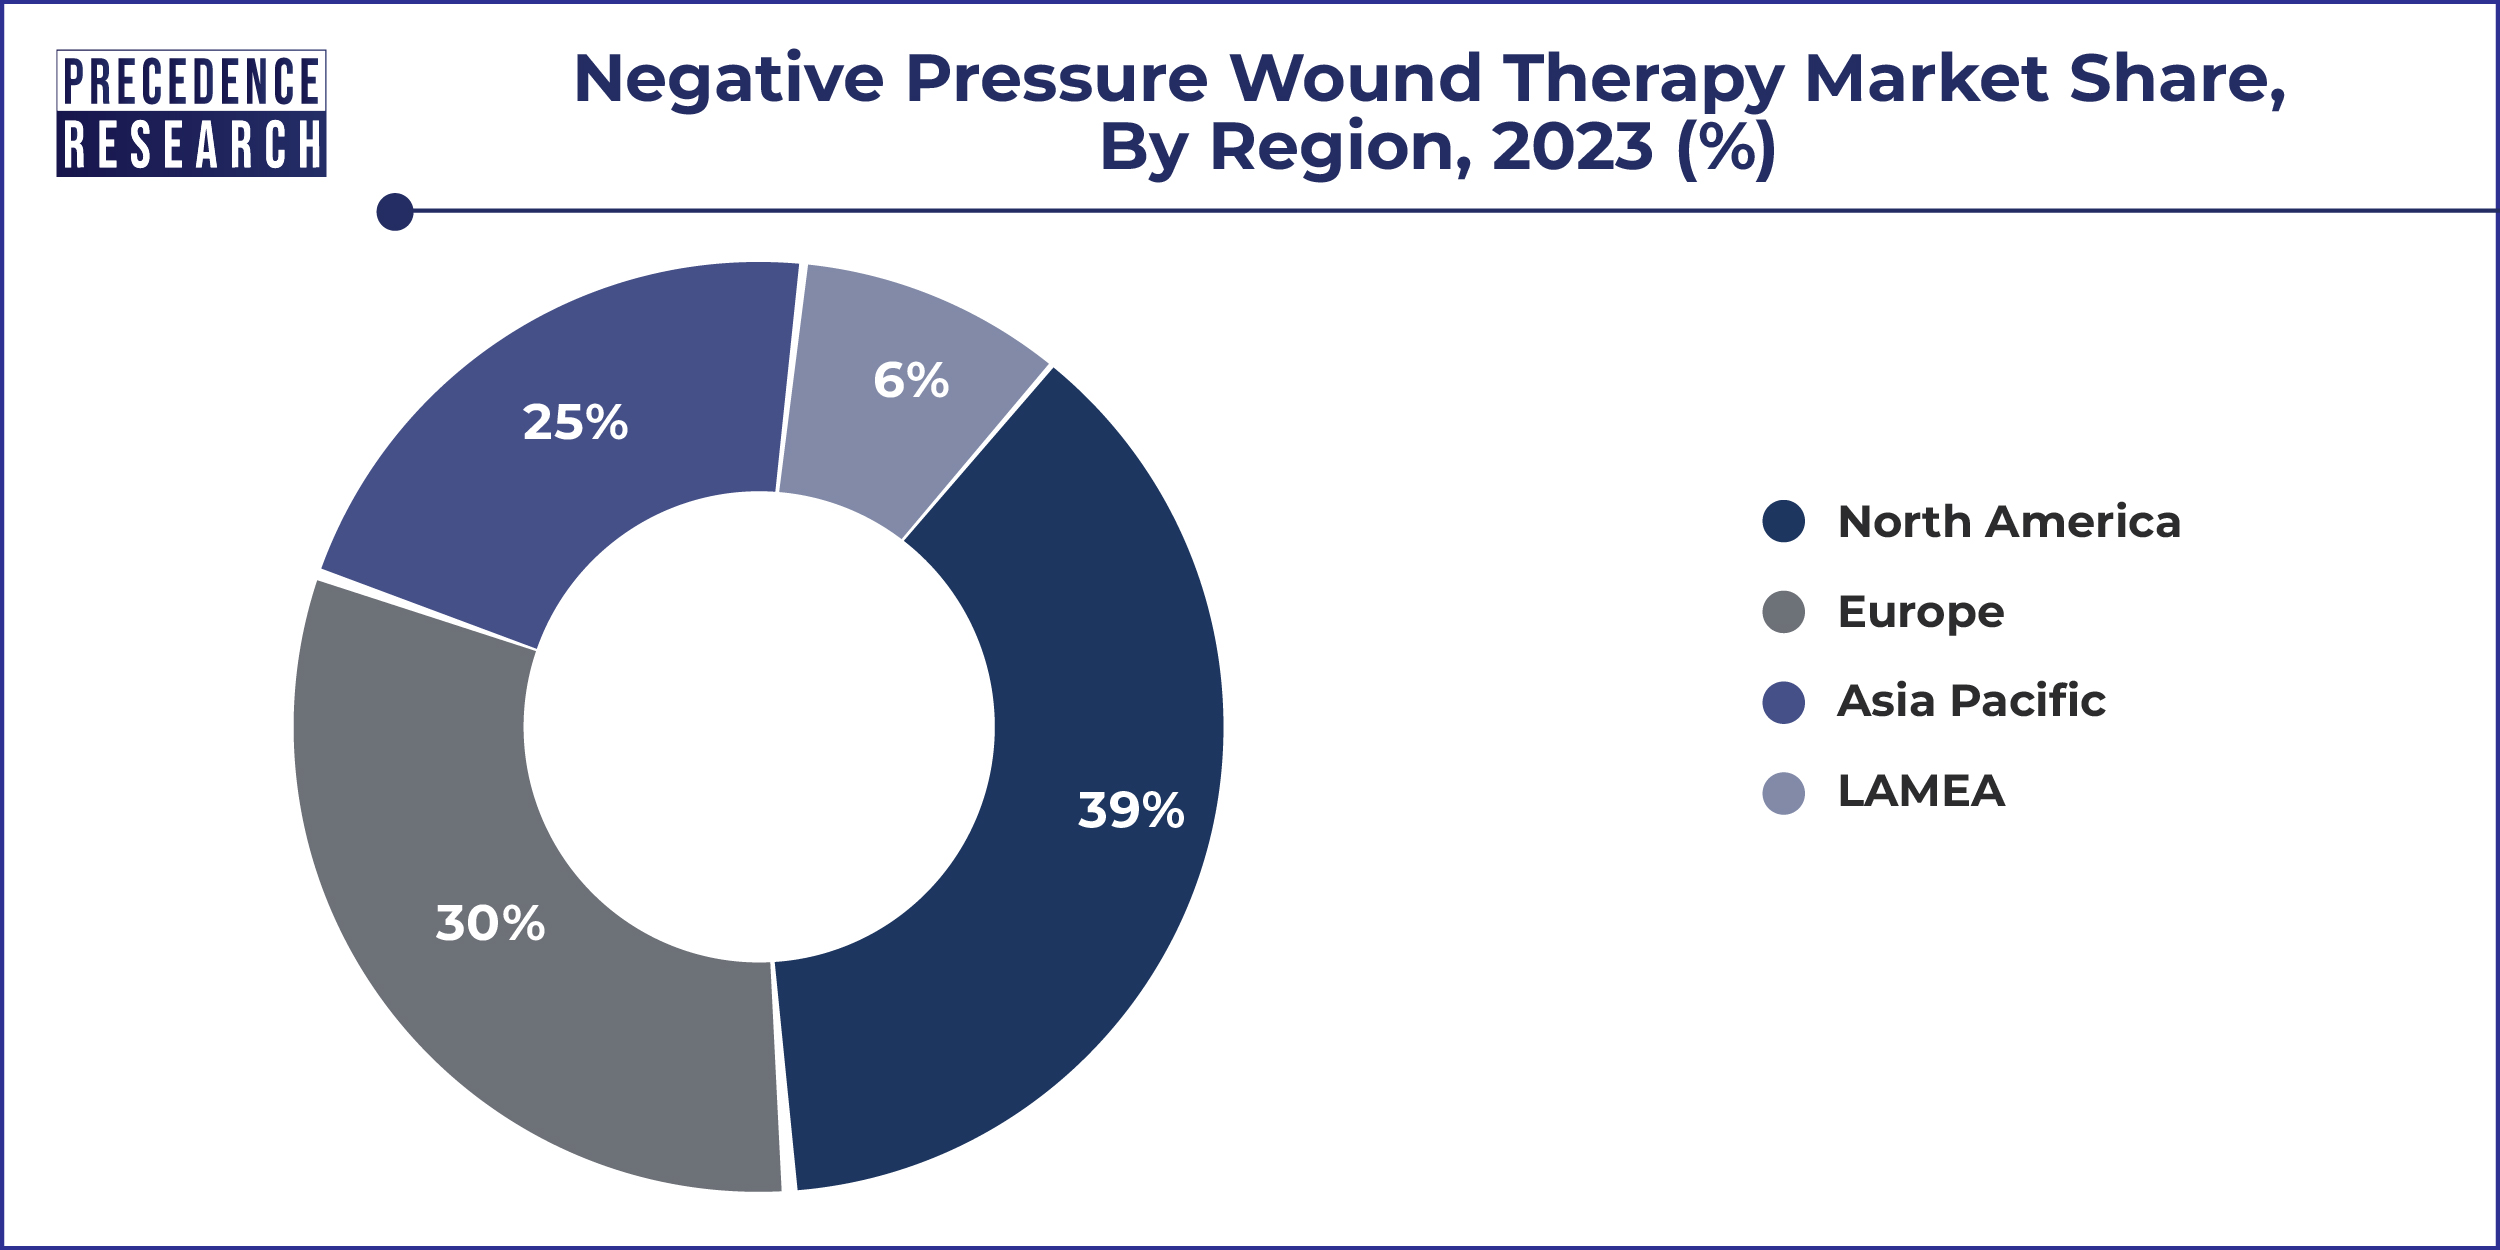 Negative Pressure Wound Therapy Market Share, By Region, 2023 (%)